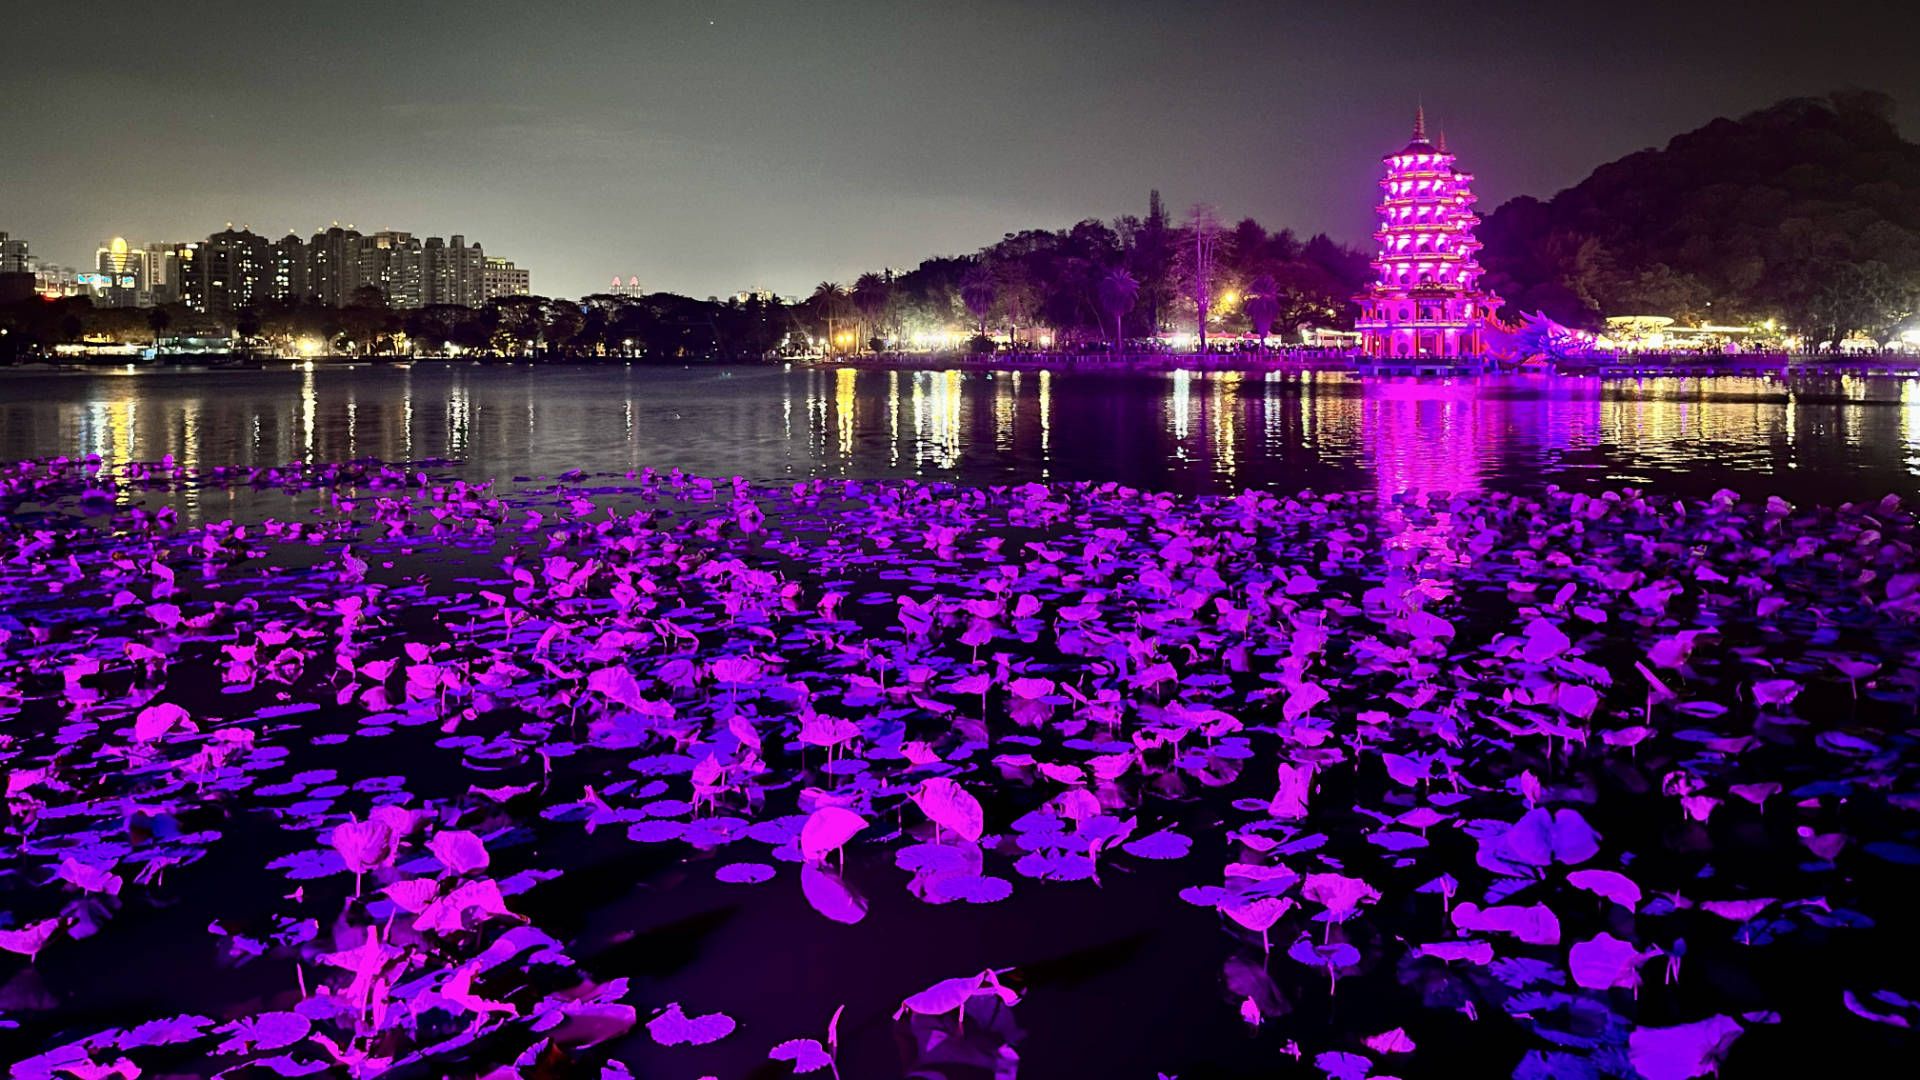 Lotus Pond, with lotus leaves in the foreground colored pink by the nearby lights.